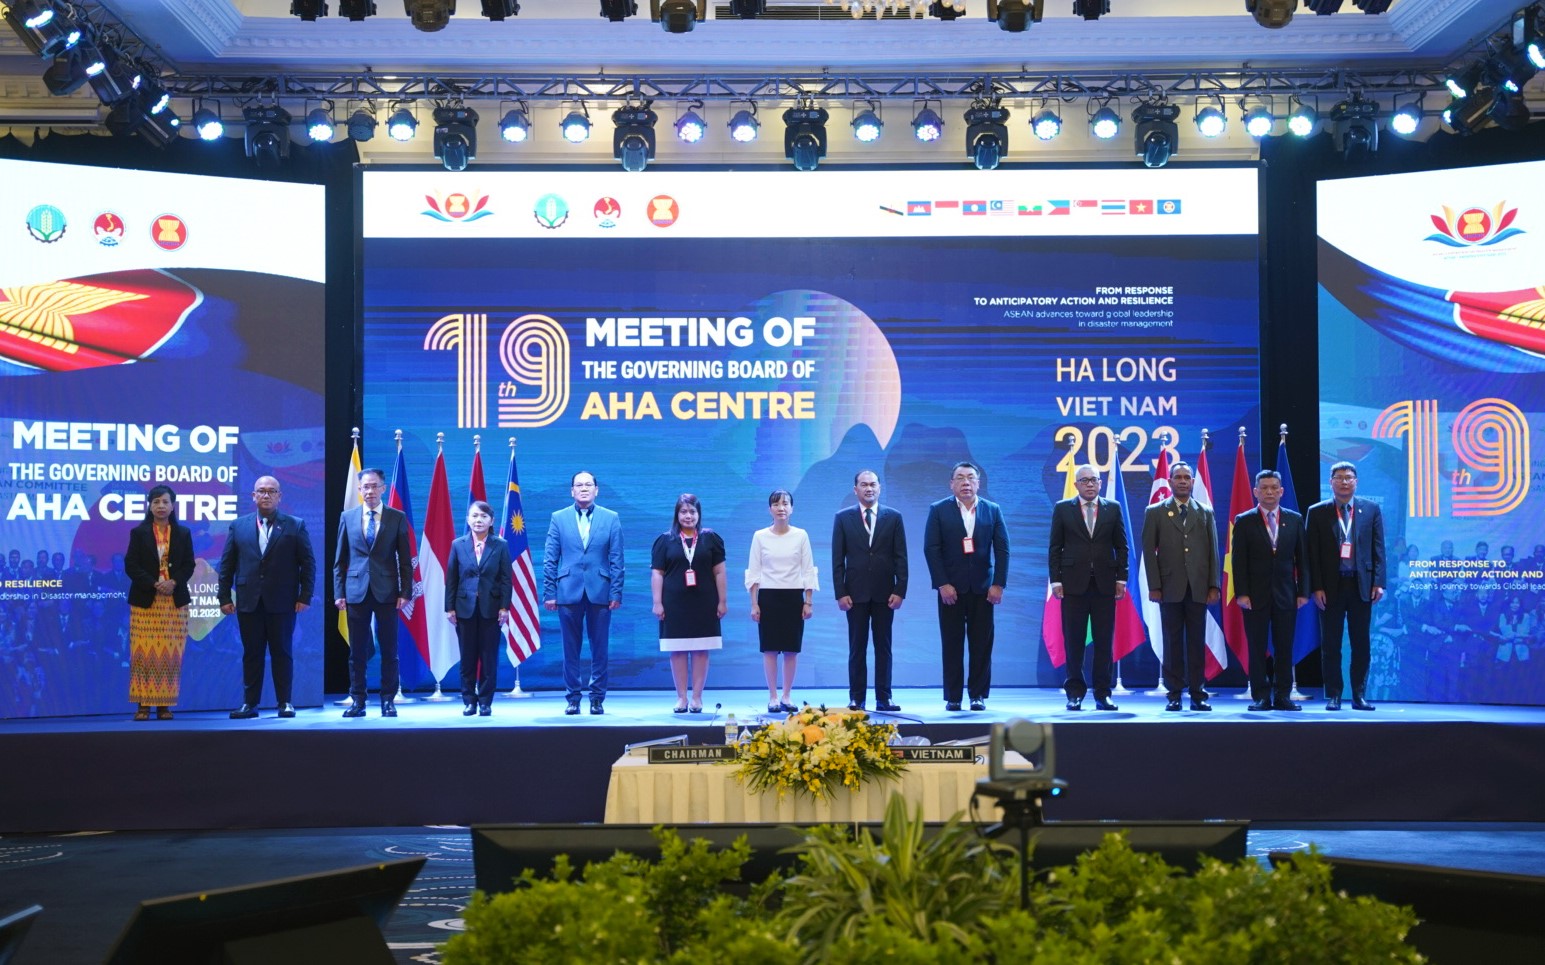 Delegates took souvenir photos before the 19th Meeting of the Governing Board of AHA Centre. Photo: Quang Dung.